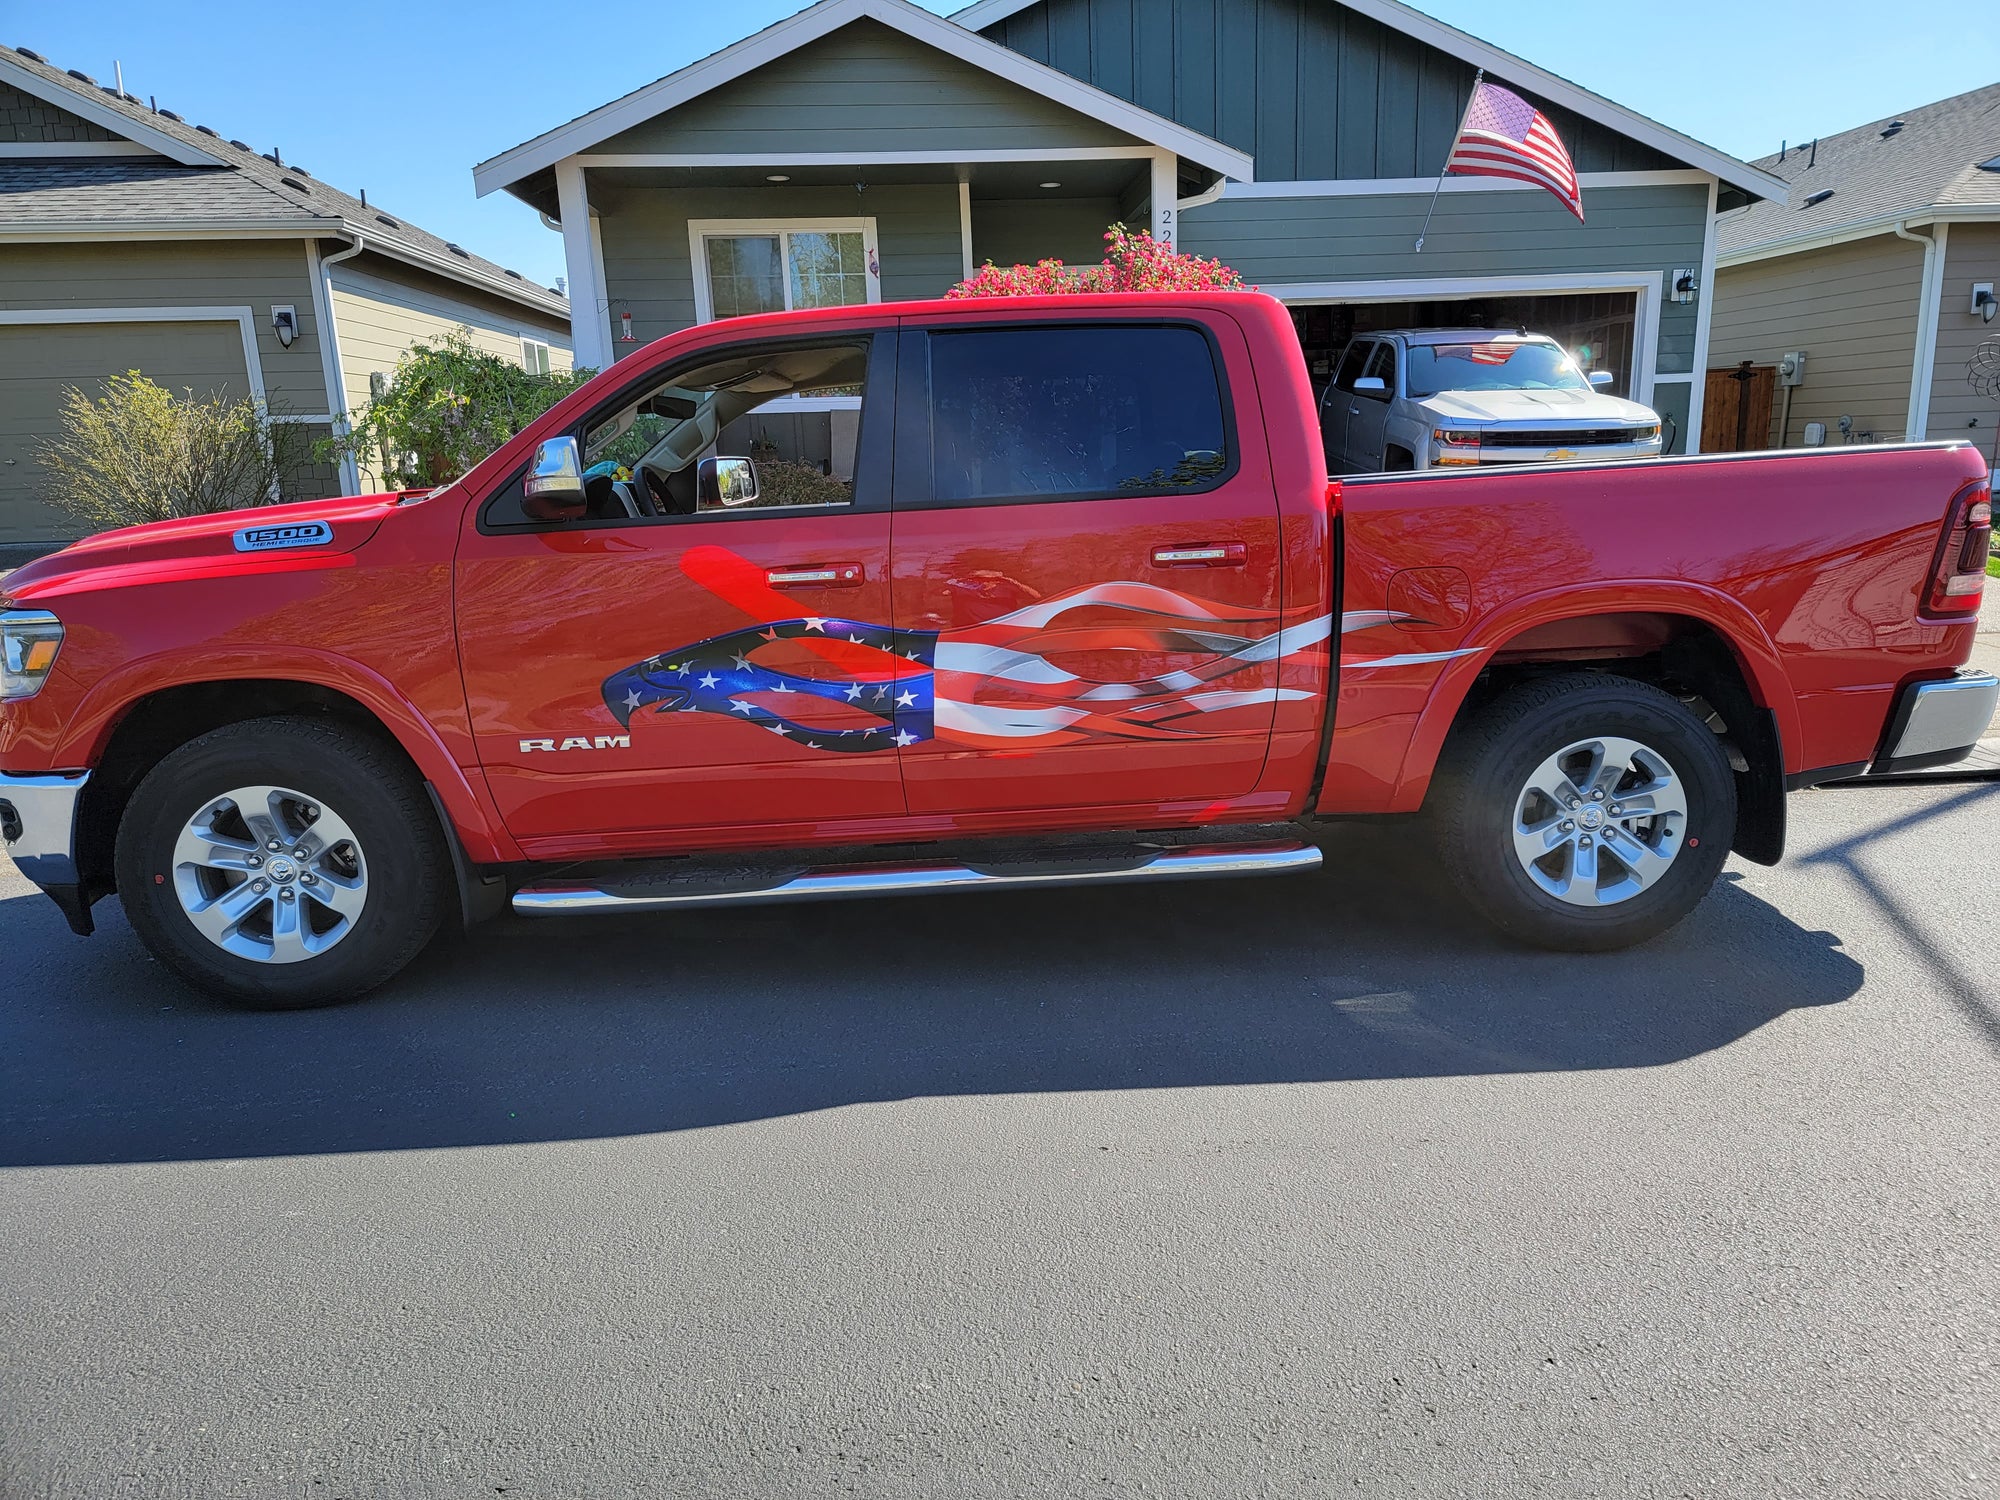 American eagle flames decal on side of red Dodge Ram pickup